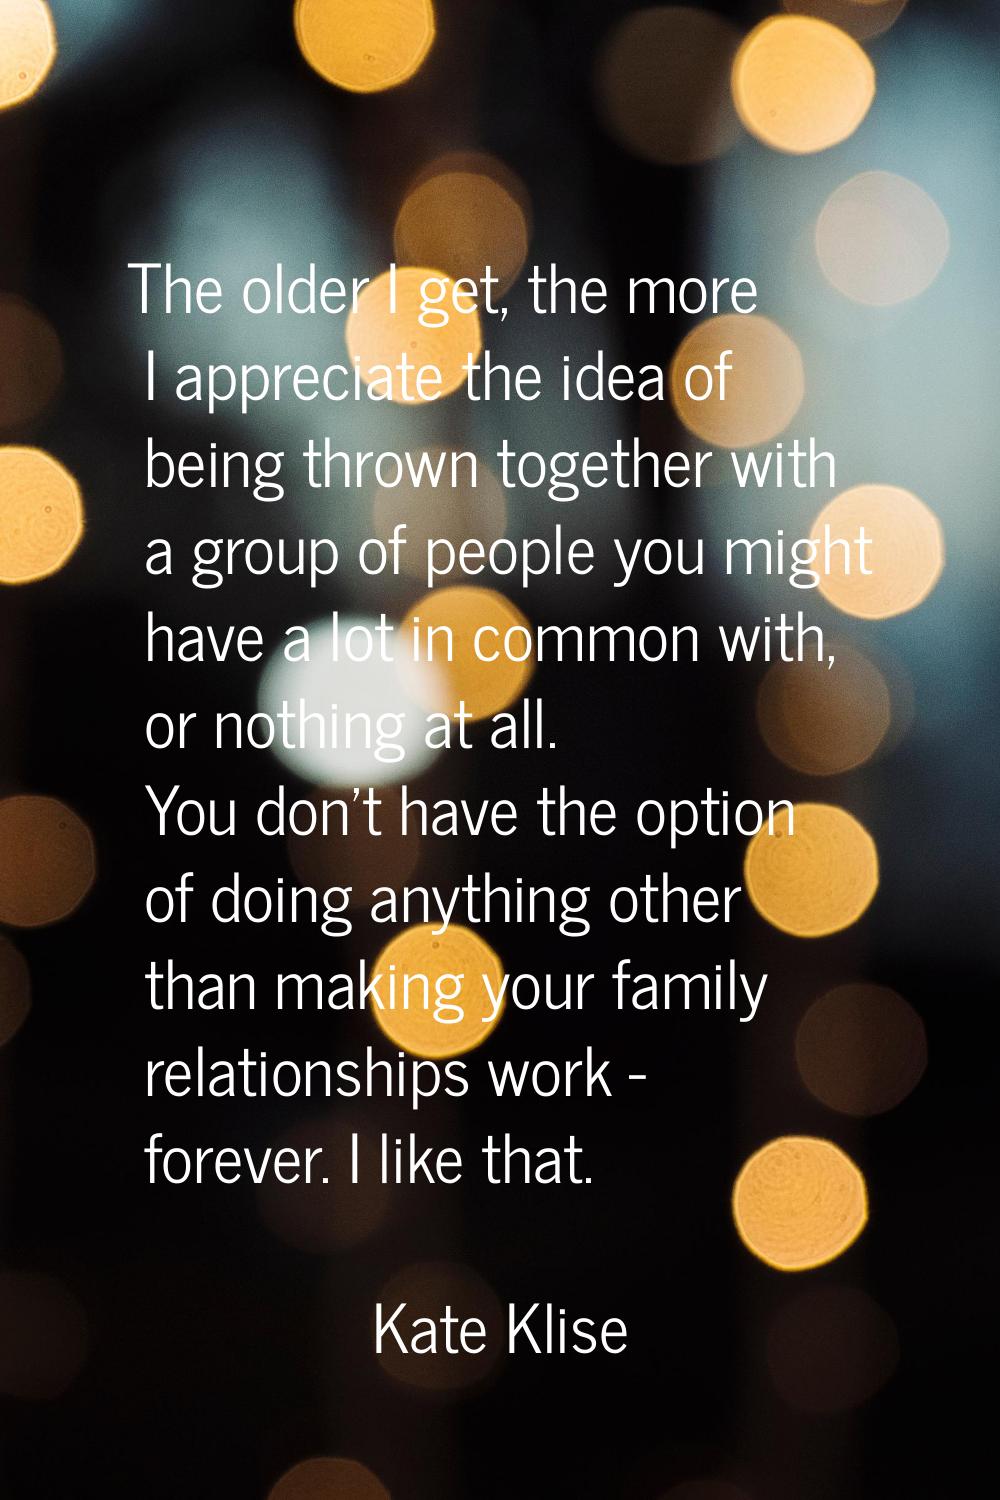 The older I get, the more I appreciate the idea of being thrown together with a group of people you